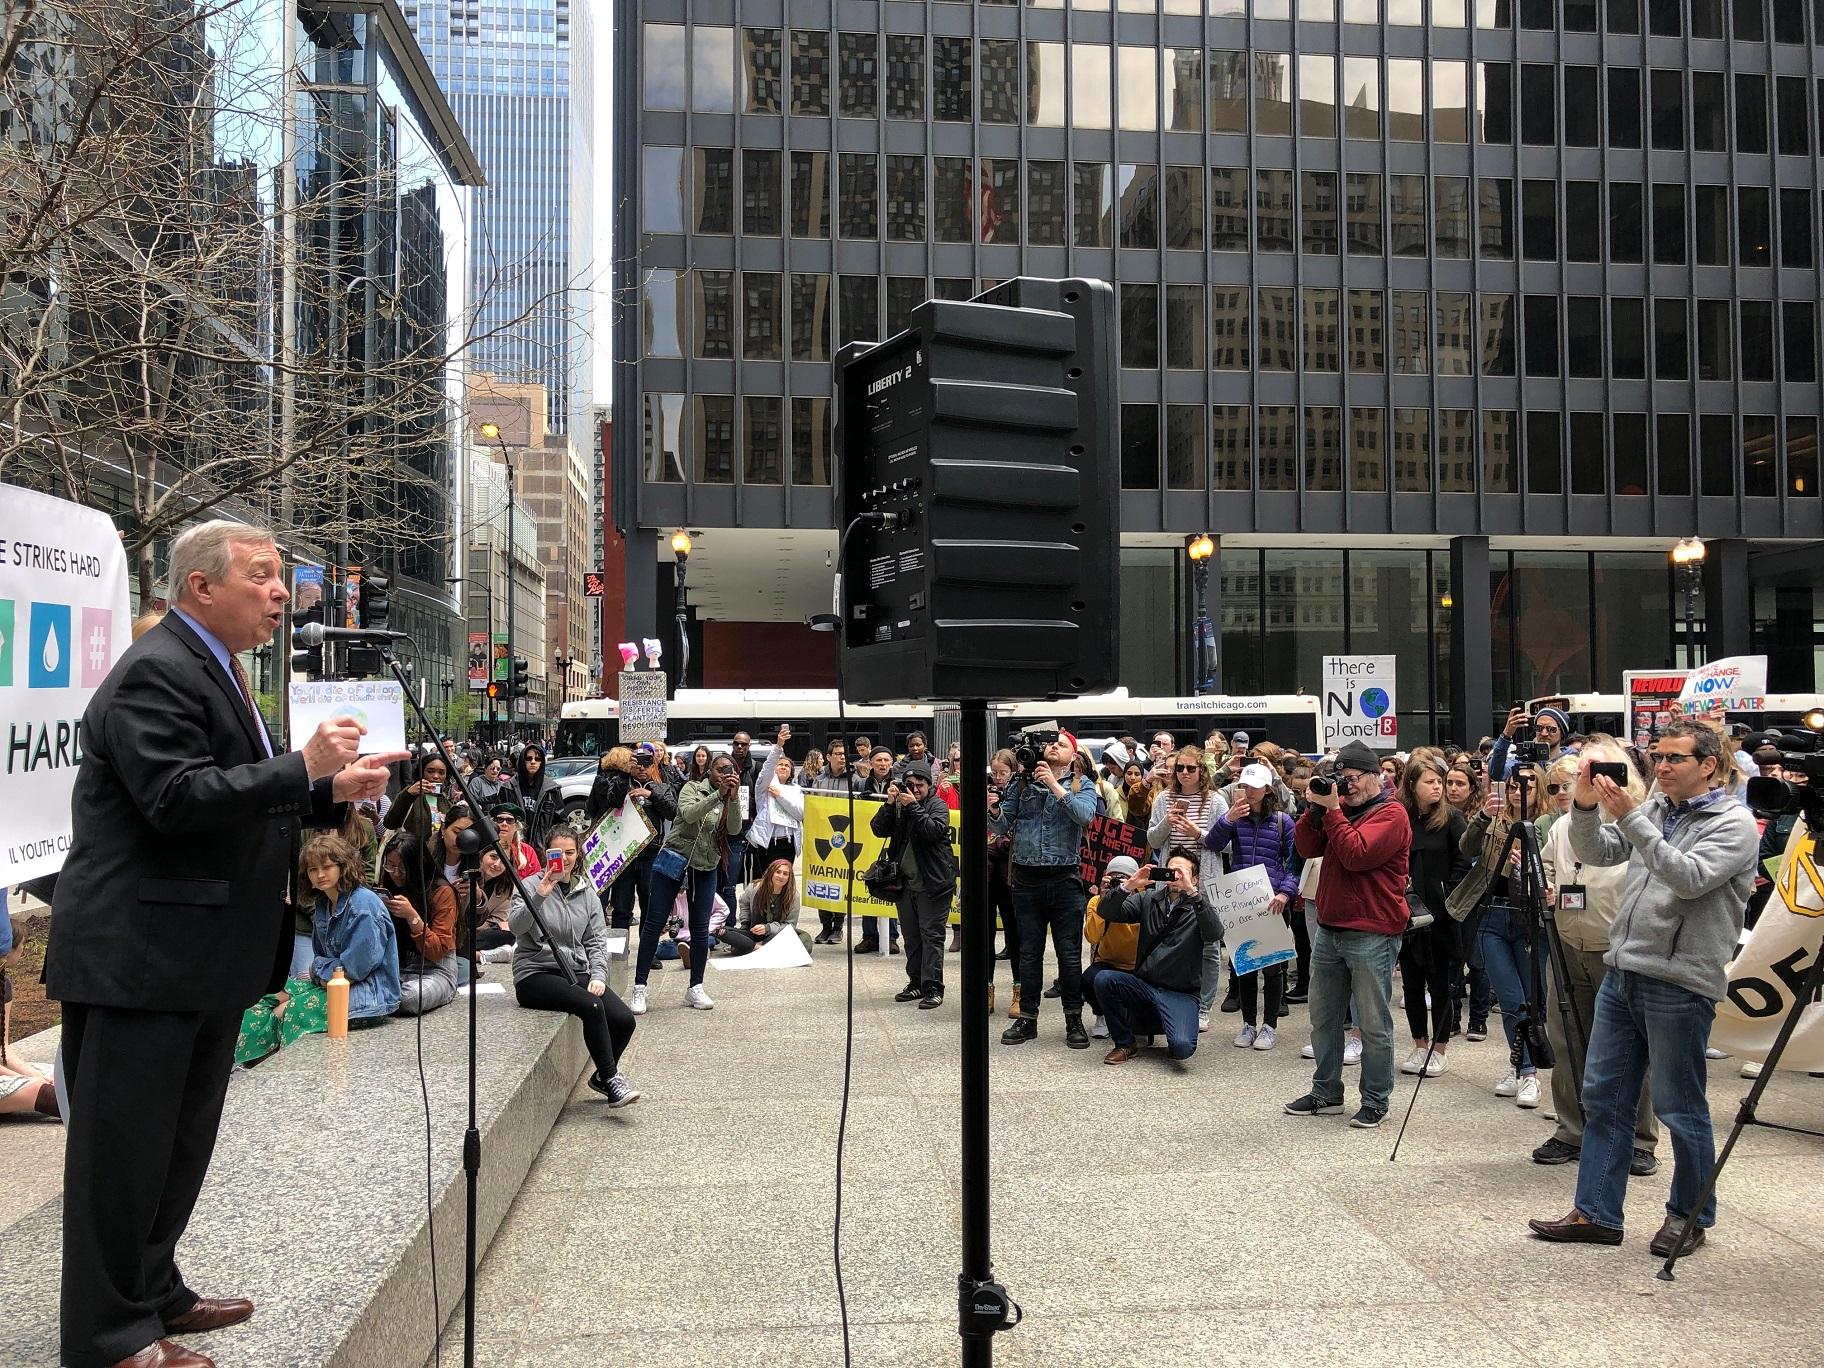 U.S. Sen. Dick Durbin speaks to students at a Youth Climate Strike event in Chicago on Friday, May 3, 2019. (Alex Ruppenthal / WTTW News)